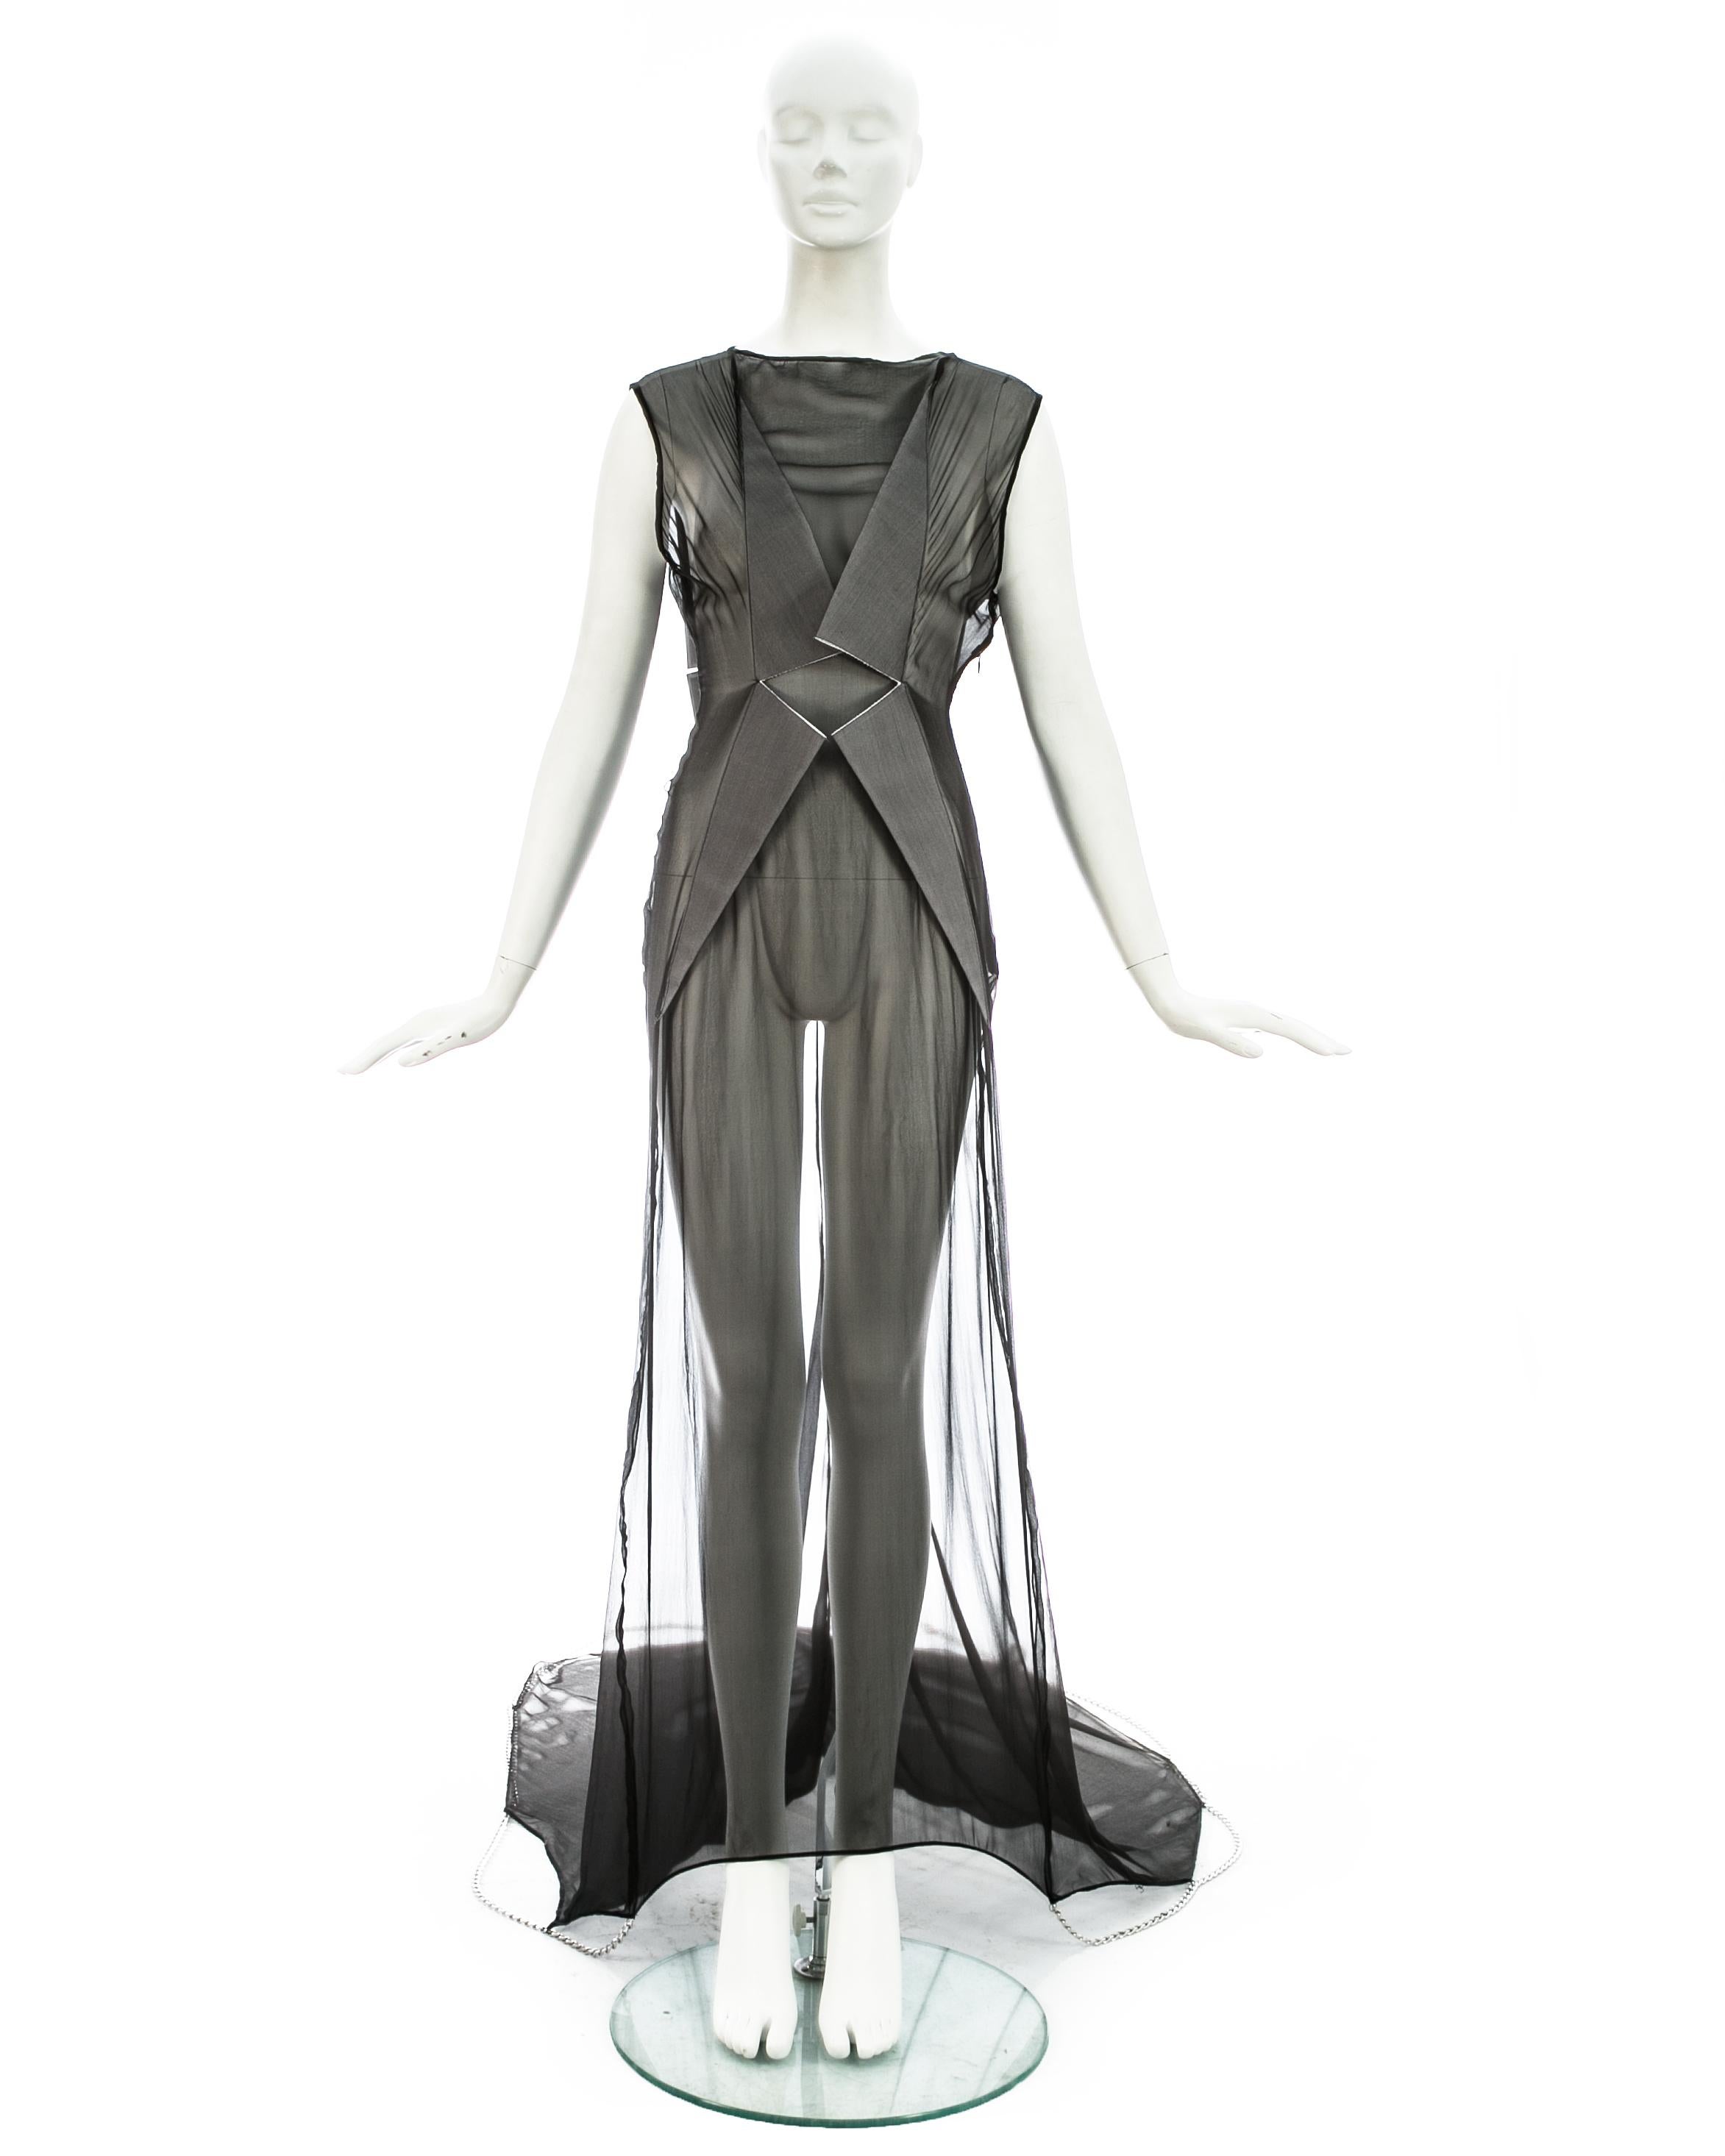 Margiela; Black silk chiffon full length evening gown with metal chain hem and lapels on back and front. The train can be brought up with a button fastening on the side seam. 

Spring-Summer 2010